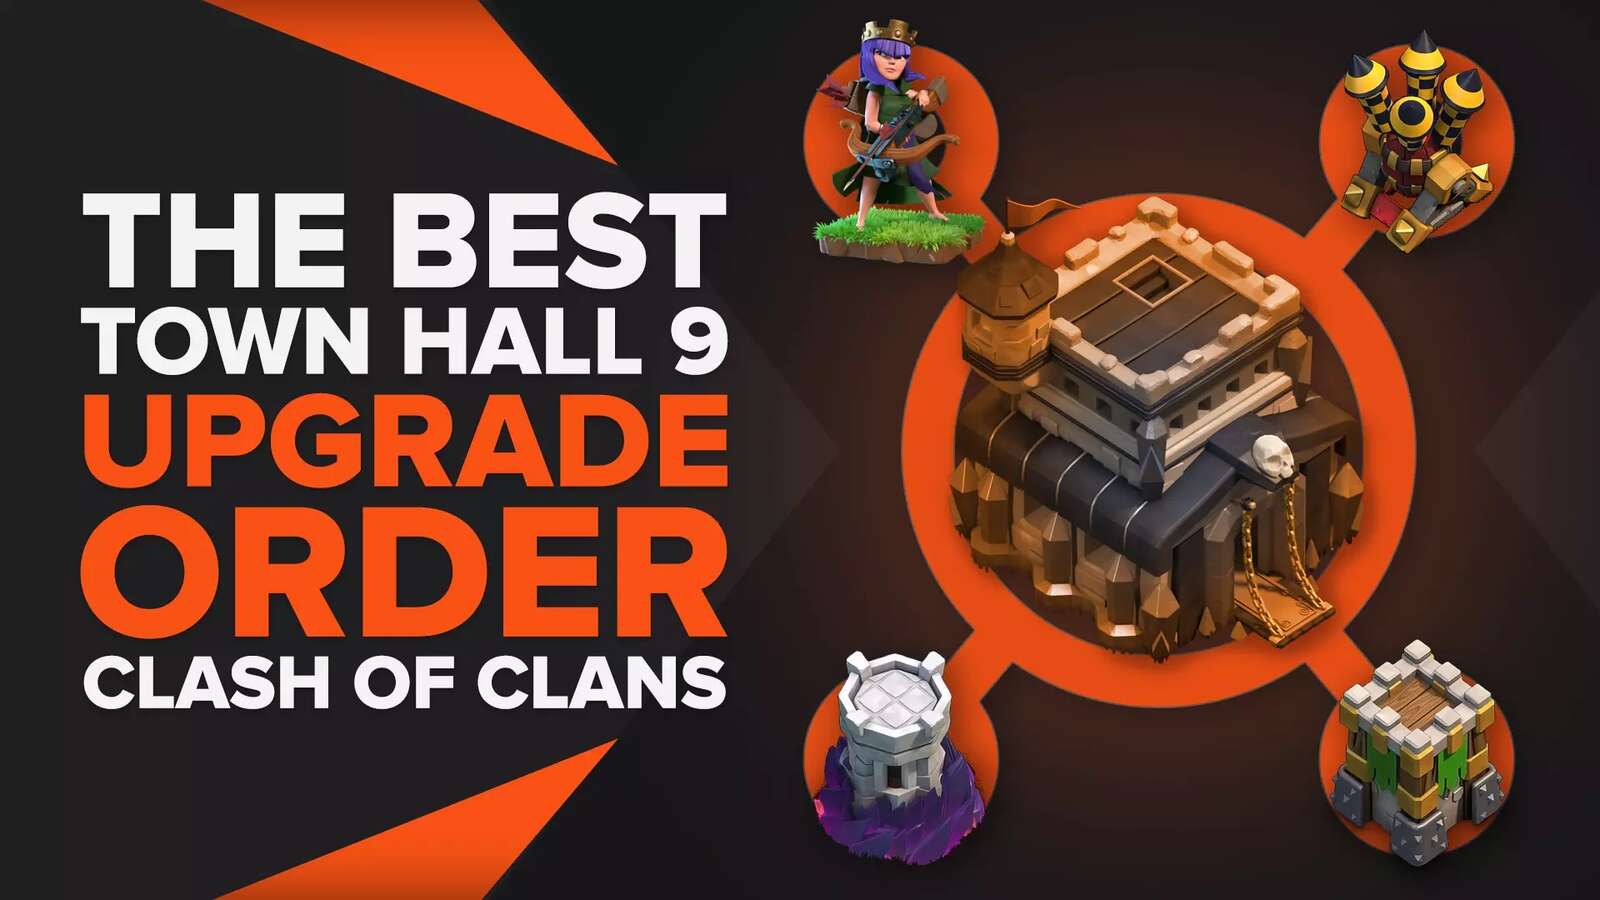 See The Best Town Hall 9 Upgrade Order In Clash Of Clans!